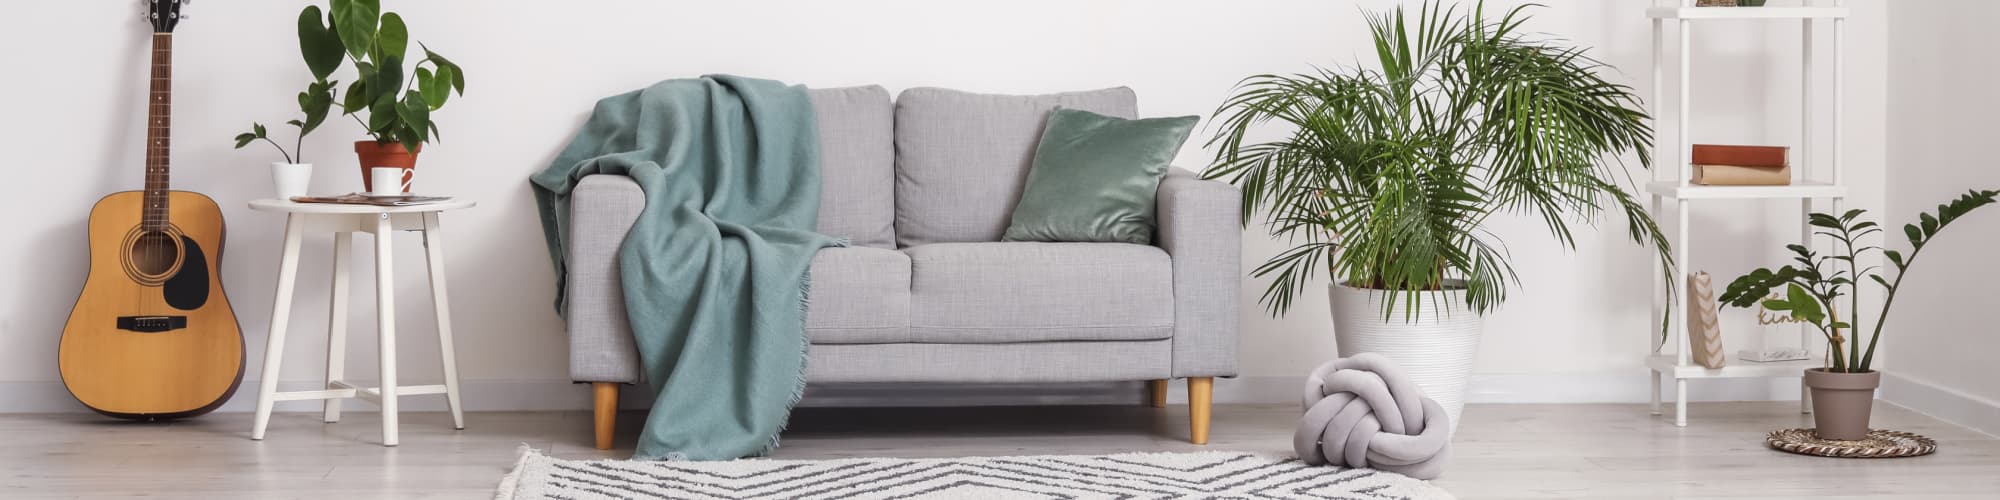 Fitted sofa with spring decorations